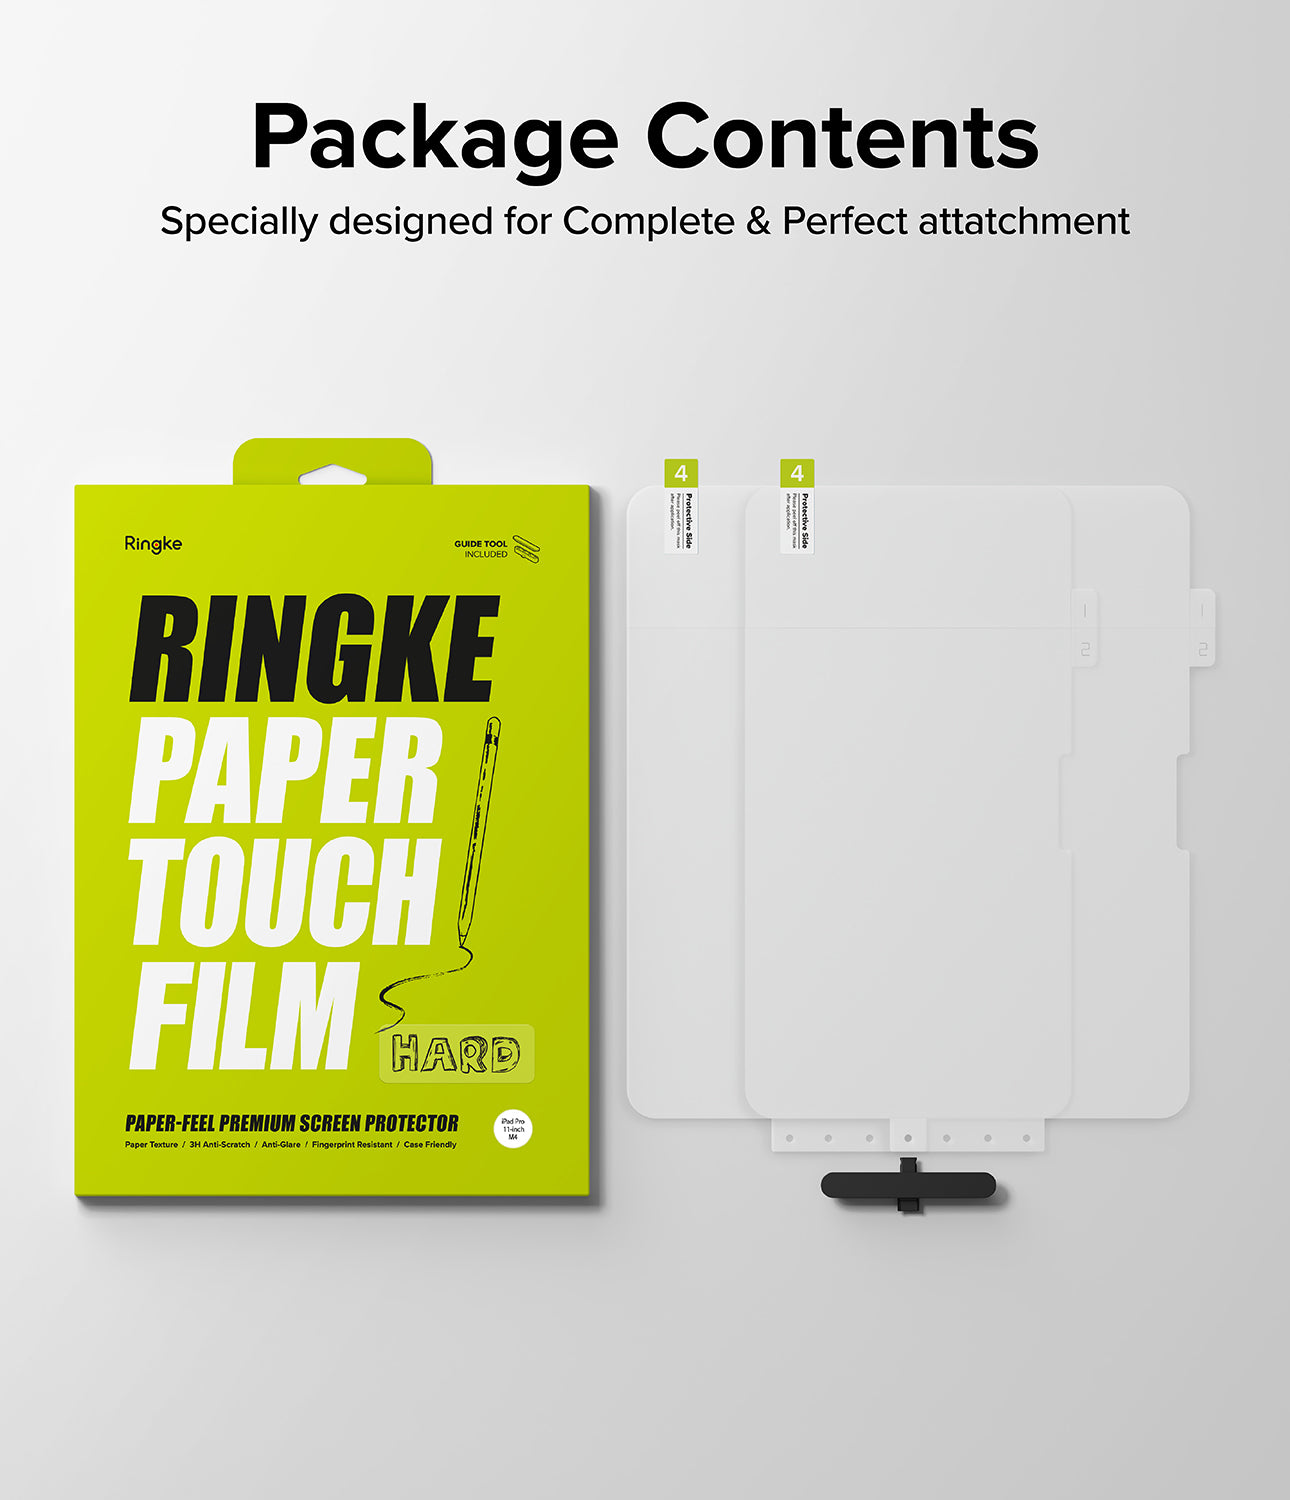 iPad Pro 11" (M4) Screen Protector | Paper Touch Film - Package Contents. Specially designed for Complete and Perfect Attachment.